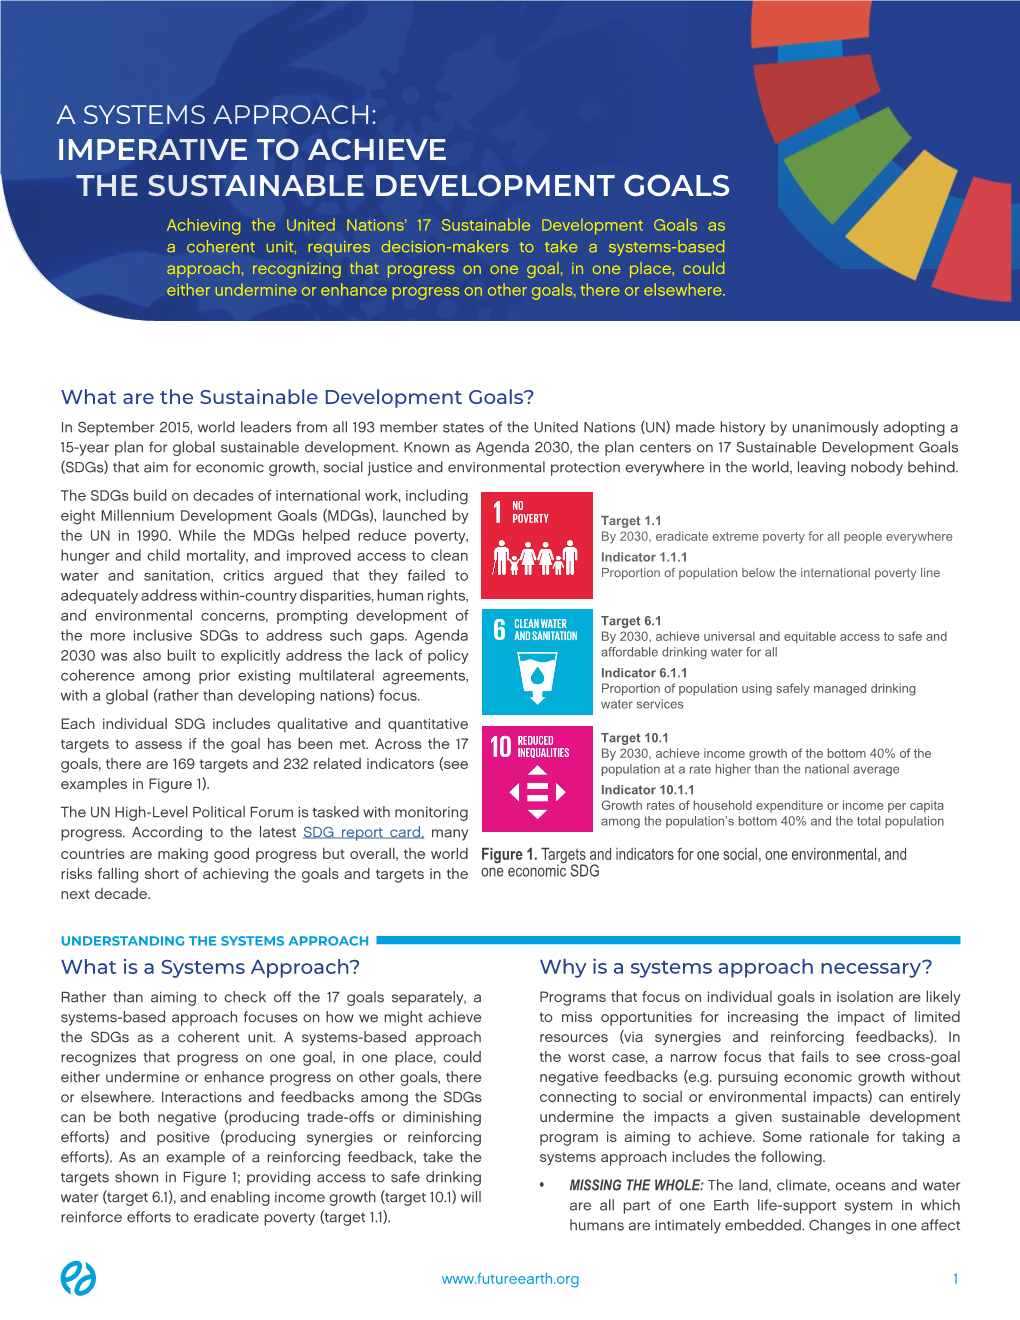 Imperative to Achieve the Sustainable Development